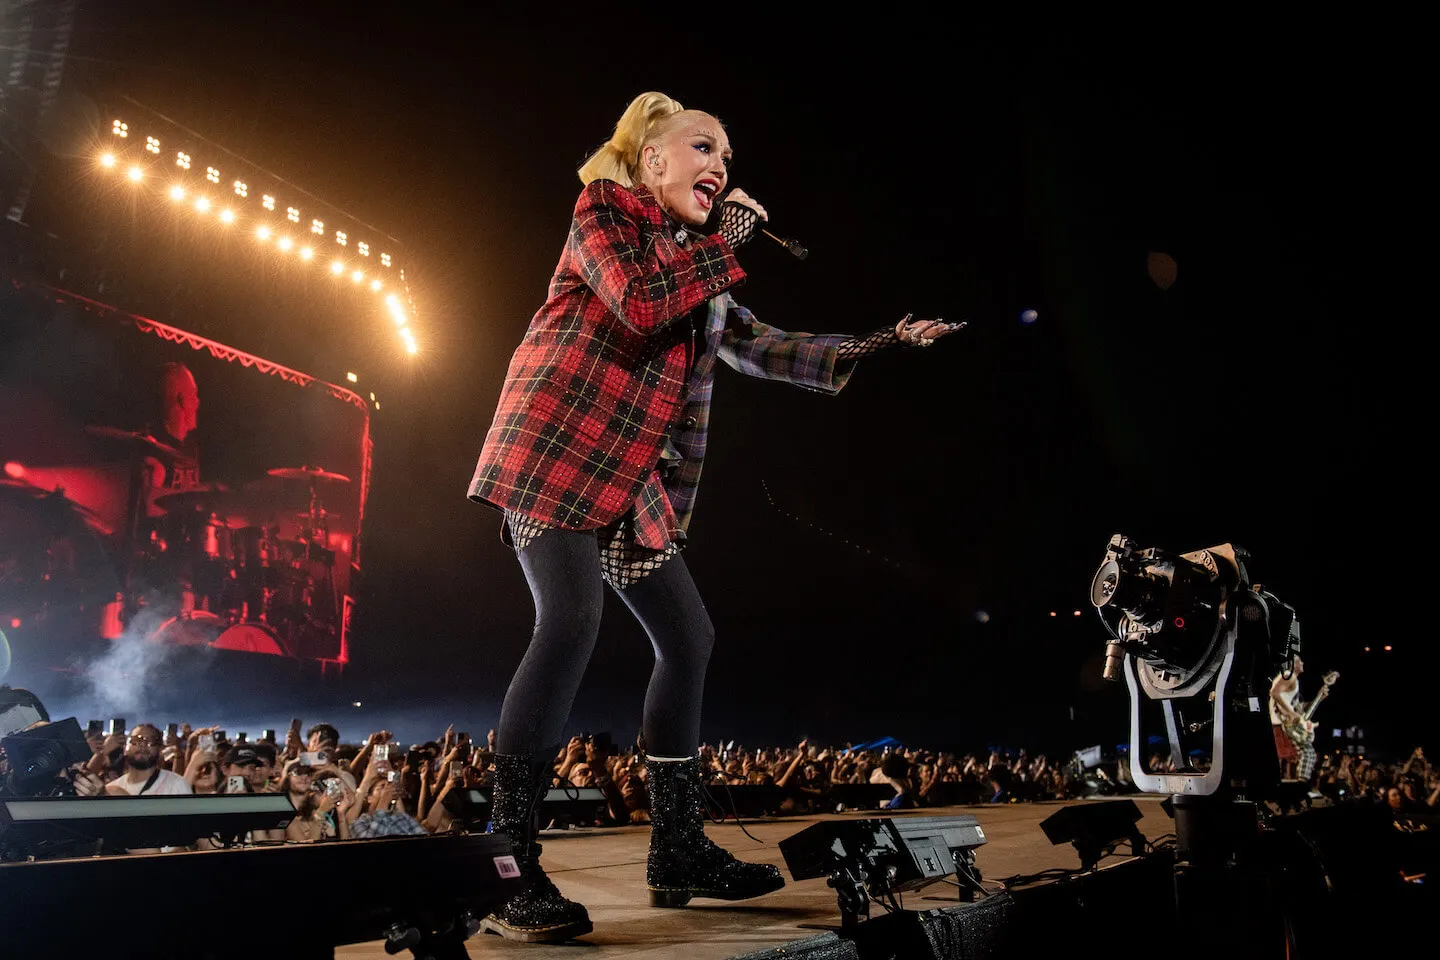 Gwen Stefani on stage in the evening in a black checked jacket. She will sing for No Doubt at the Coachella Festival in 2024.